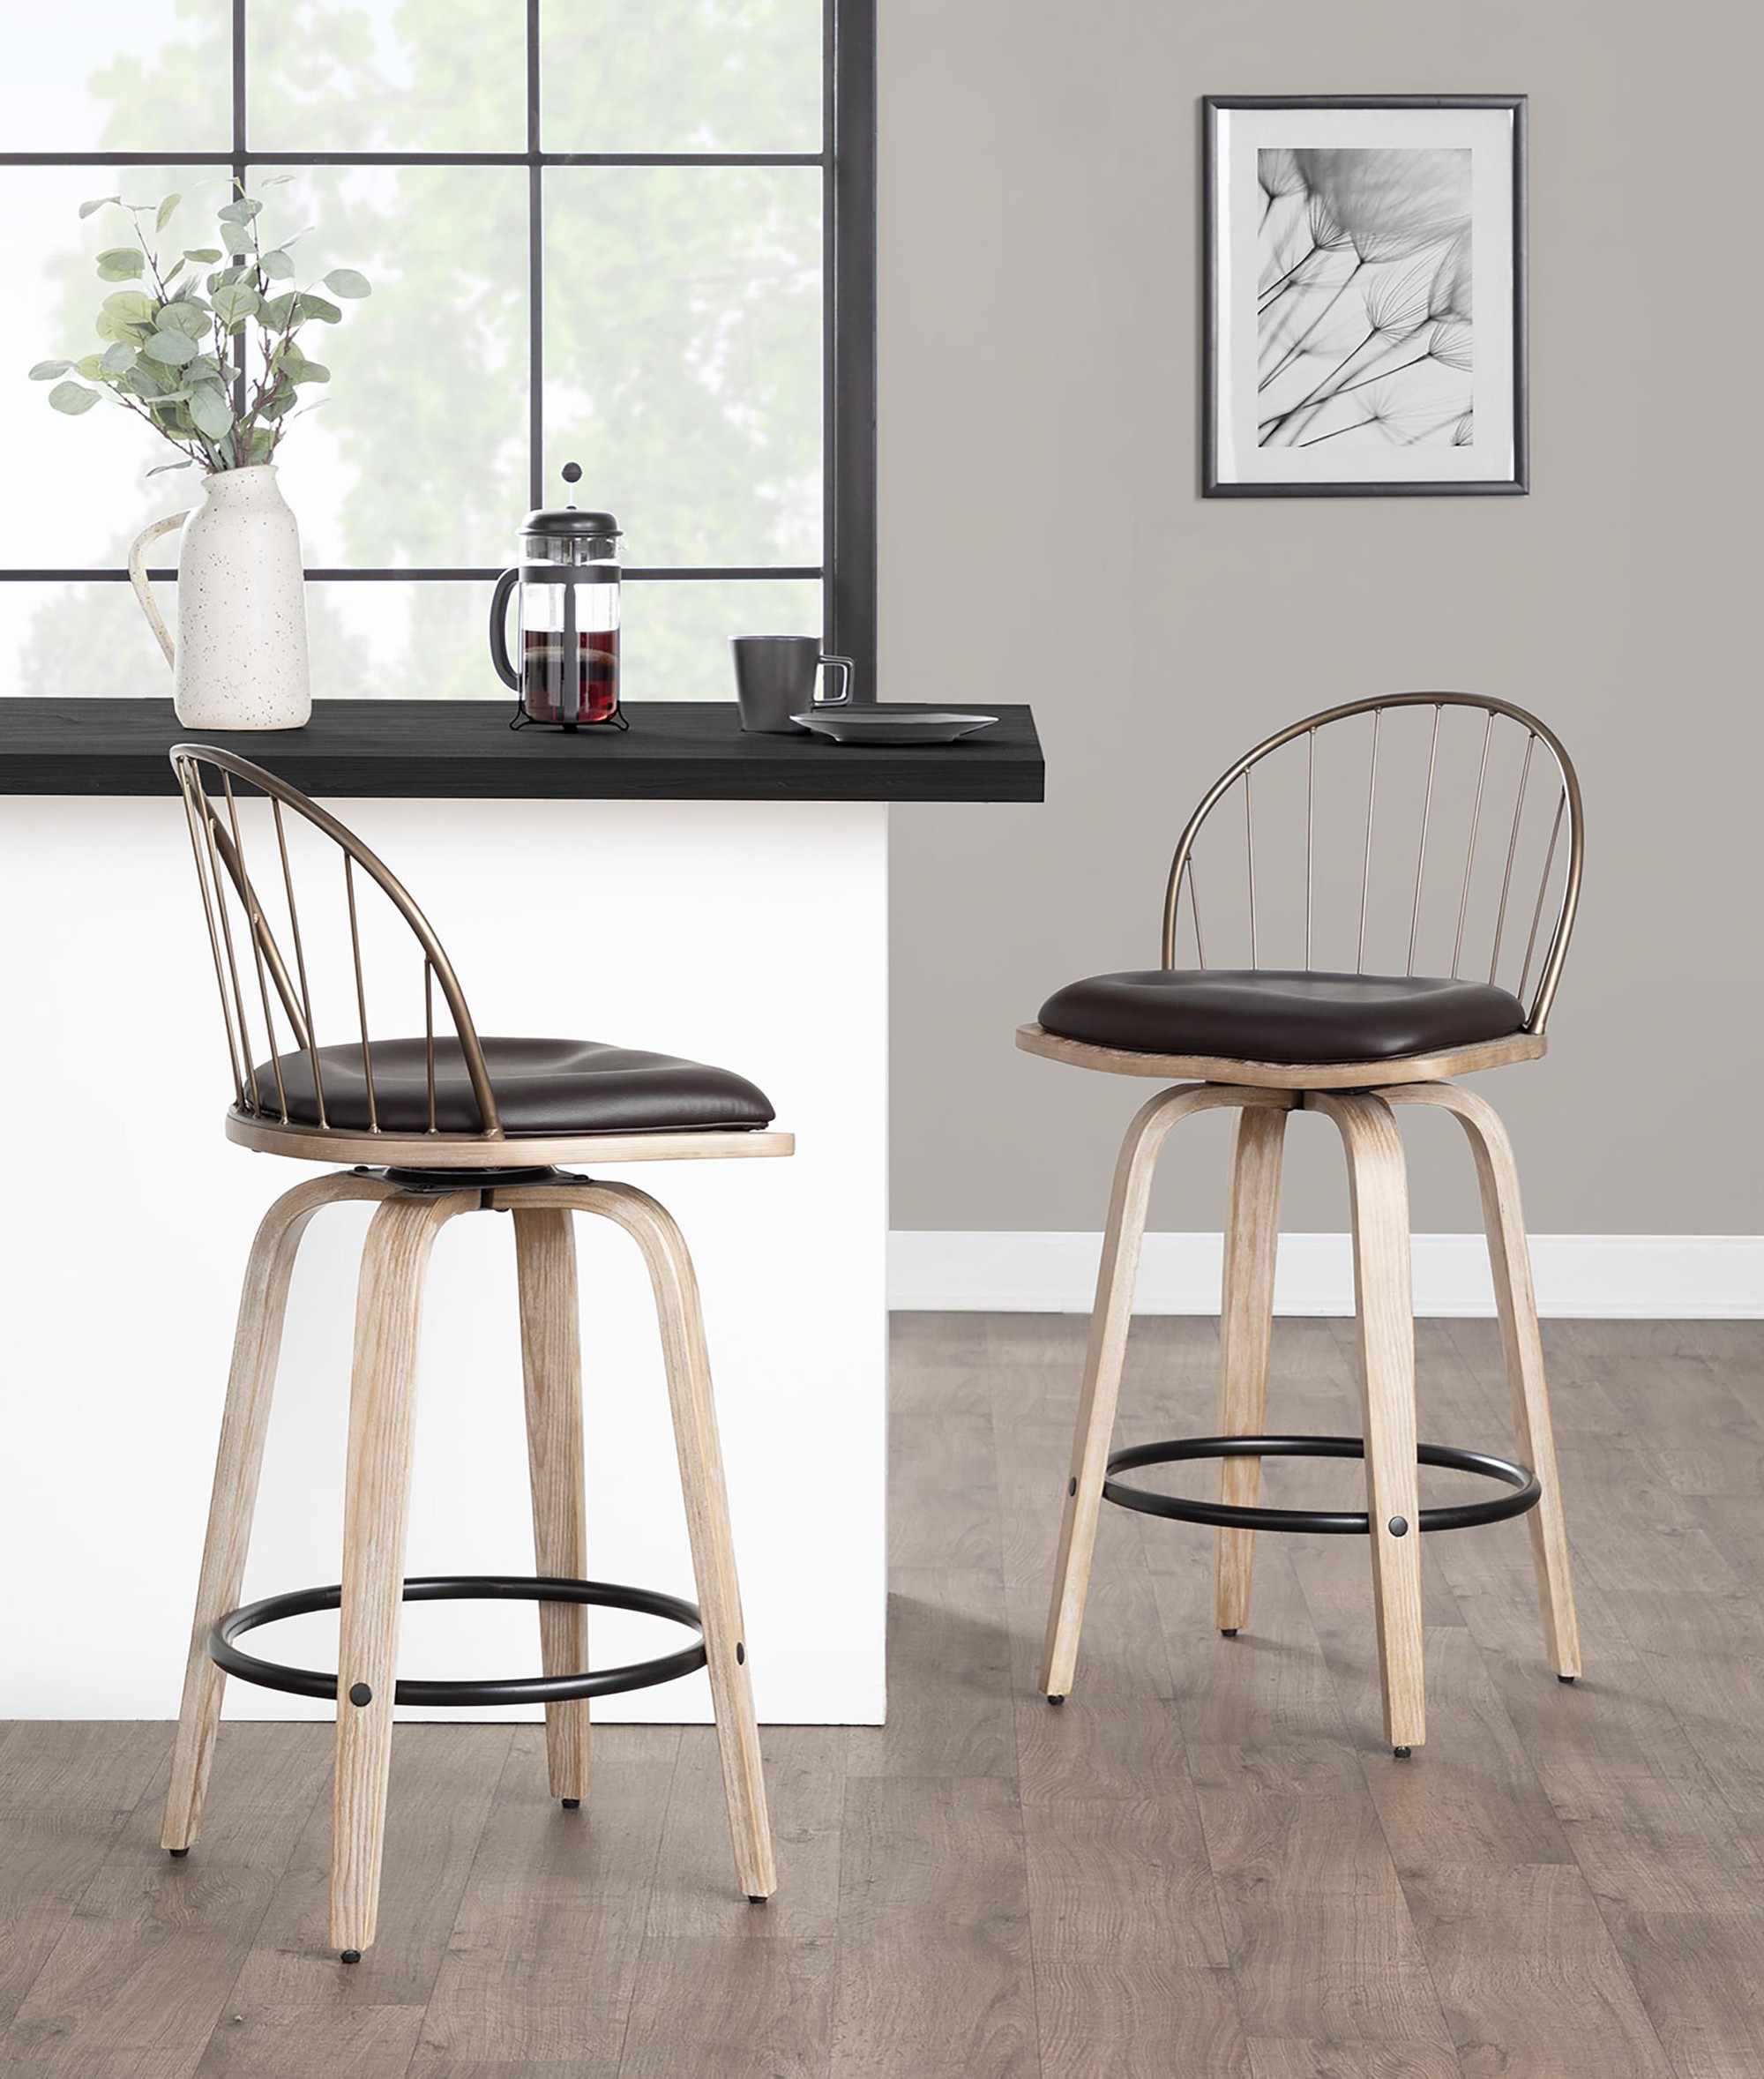 Riley 26" Fixed-height Counter Stool - Set Of 2